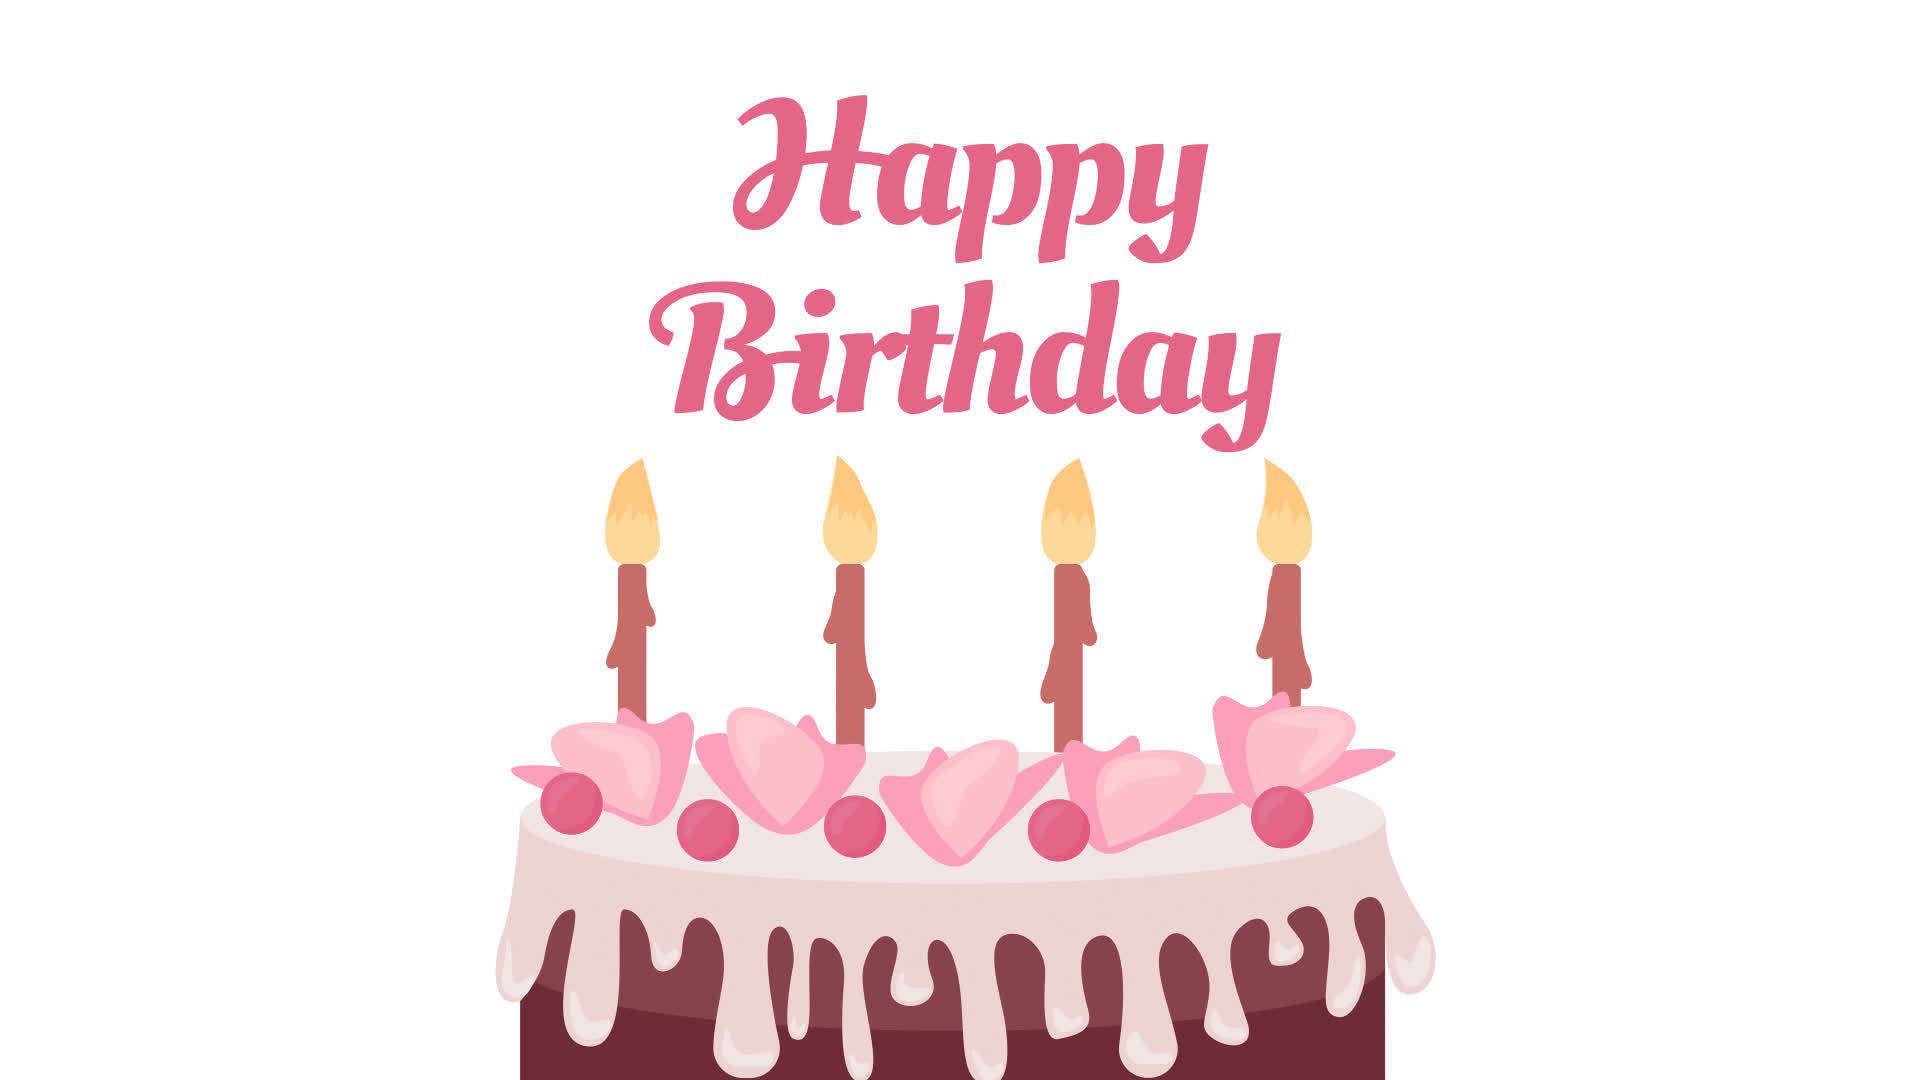 130 Cartoon Birthday Cake With Candles And Pink Icing Illustrations  RoyaltyFree Vector Graphics  Clip Art  iStock